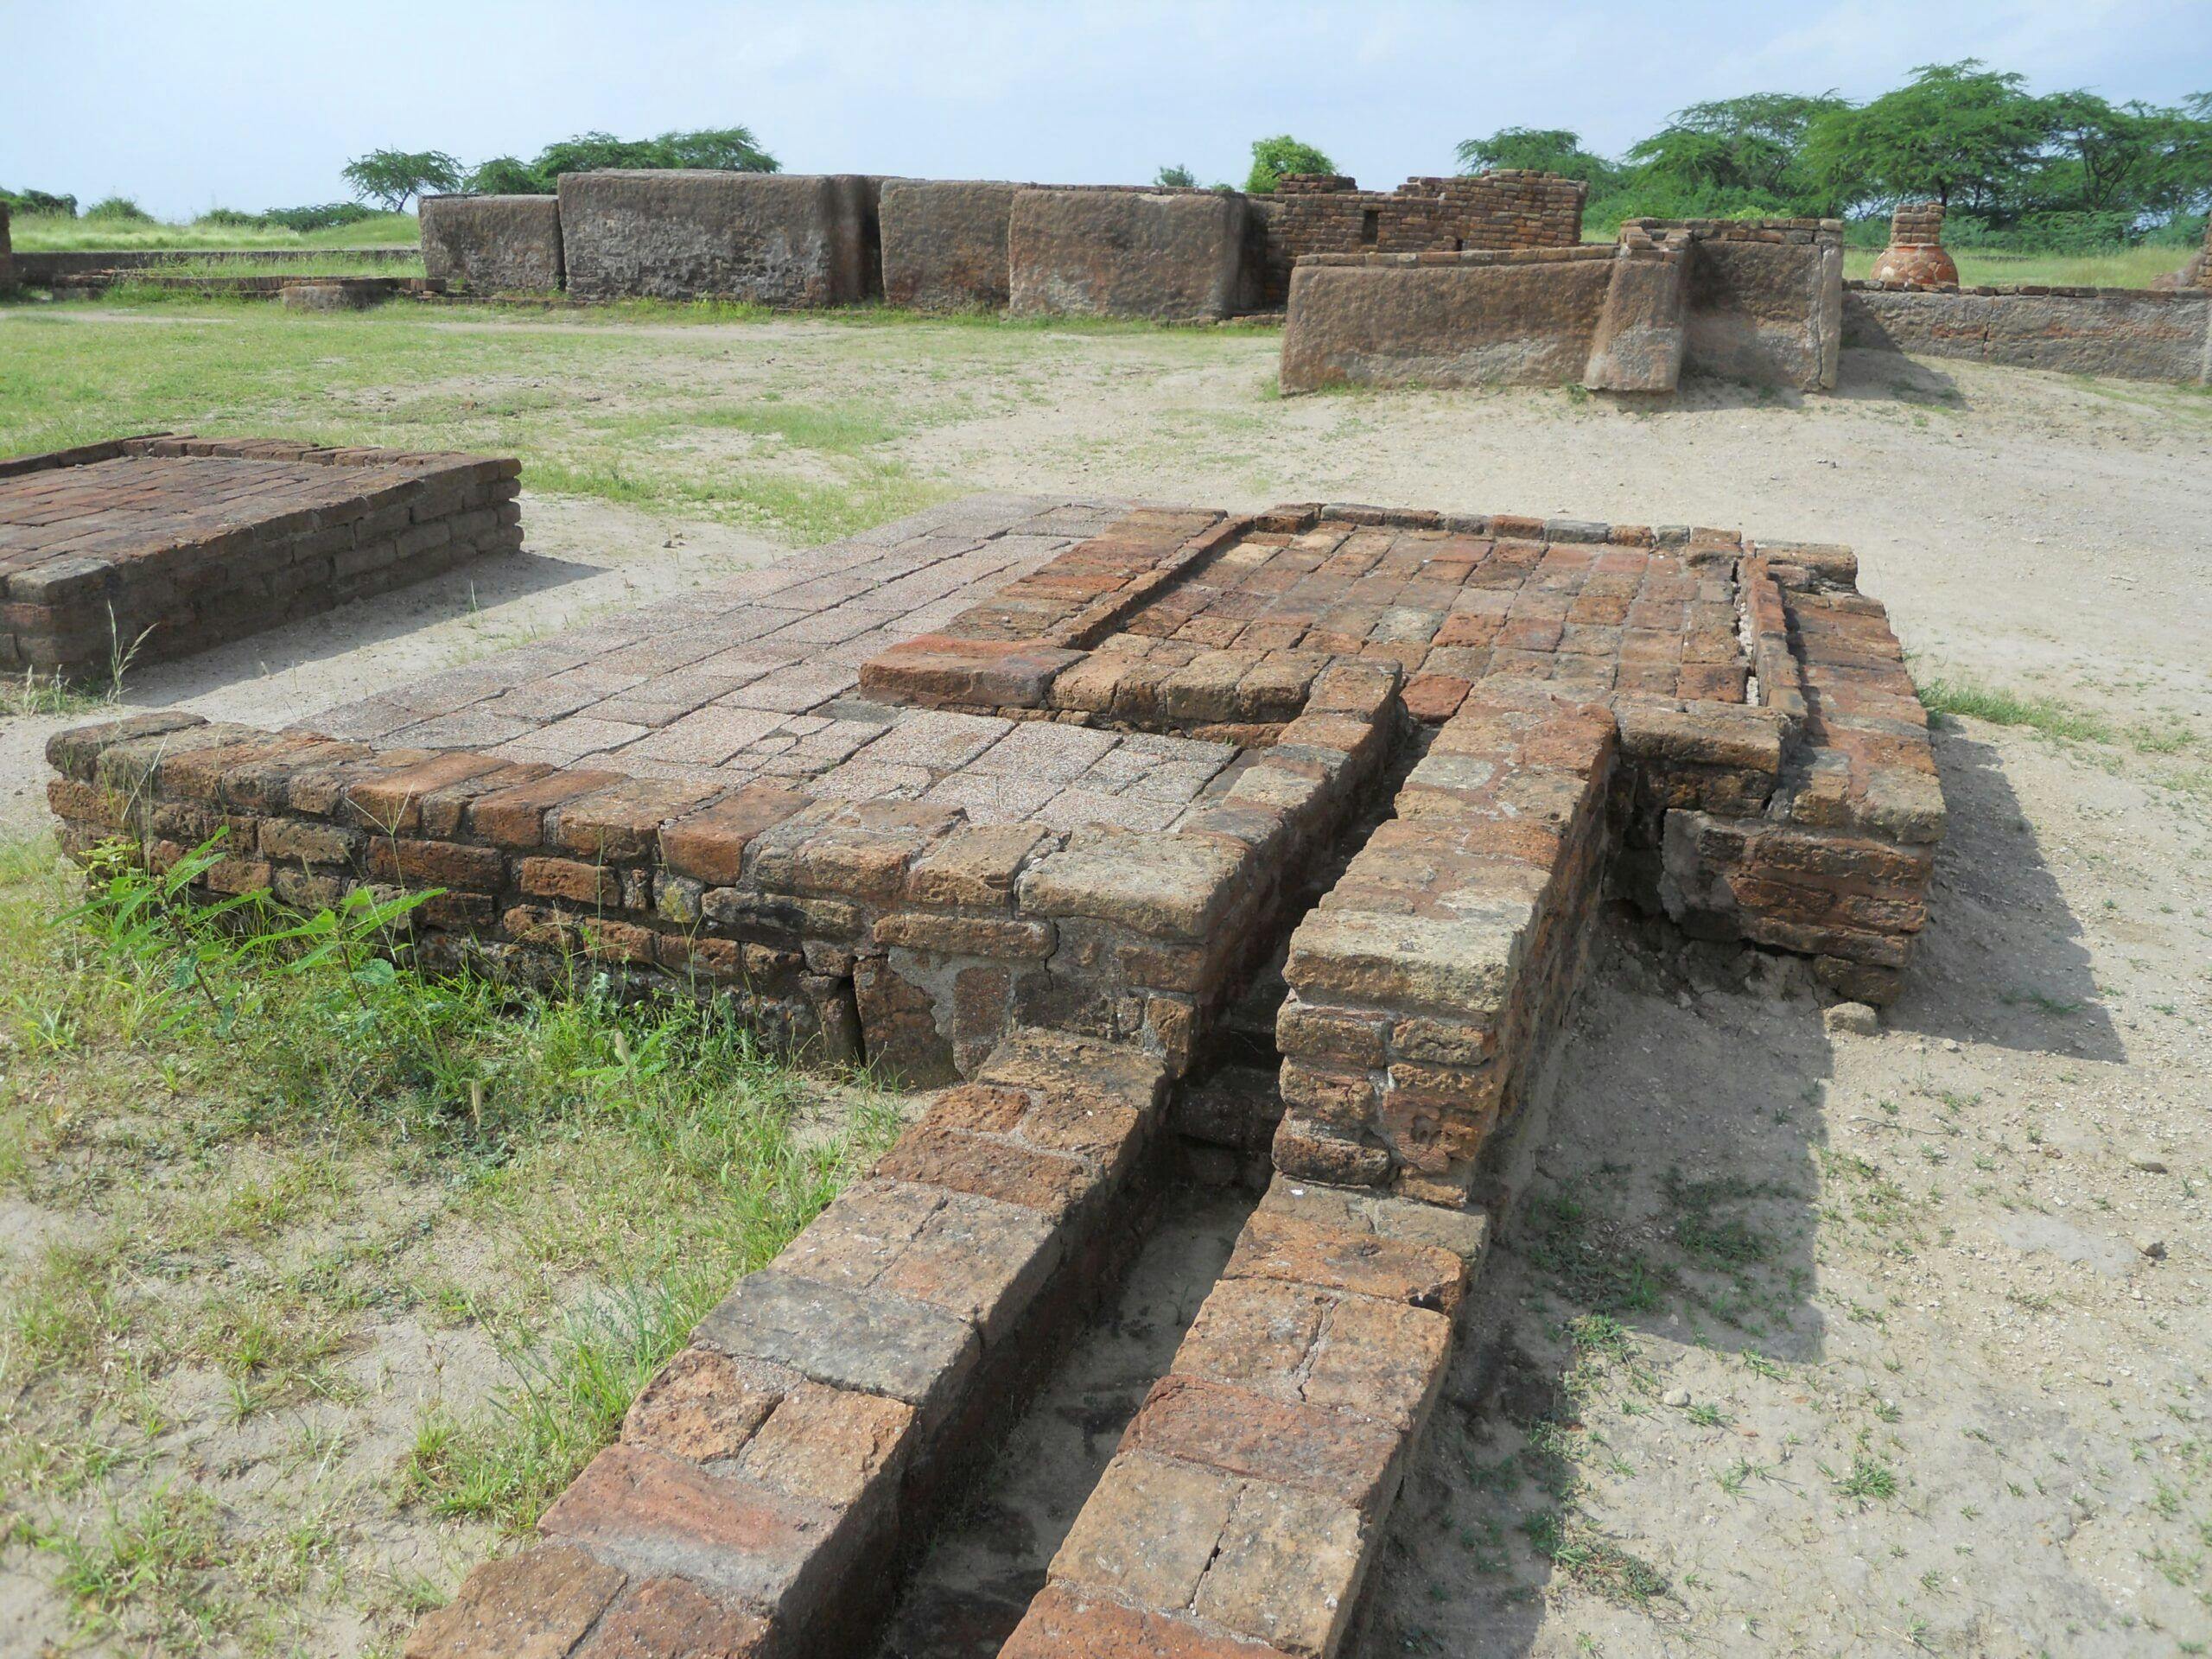 The drainage system at Lothal